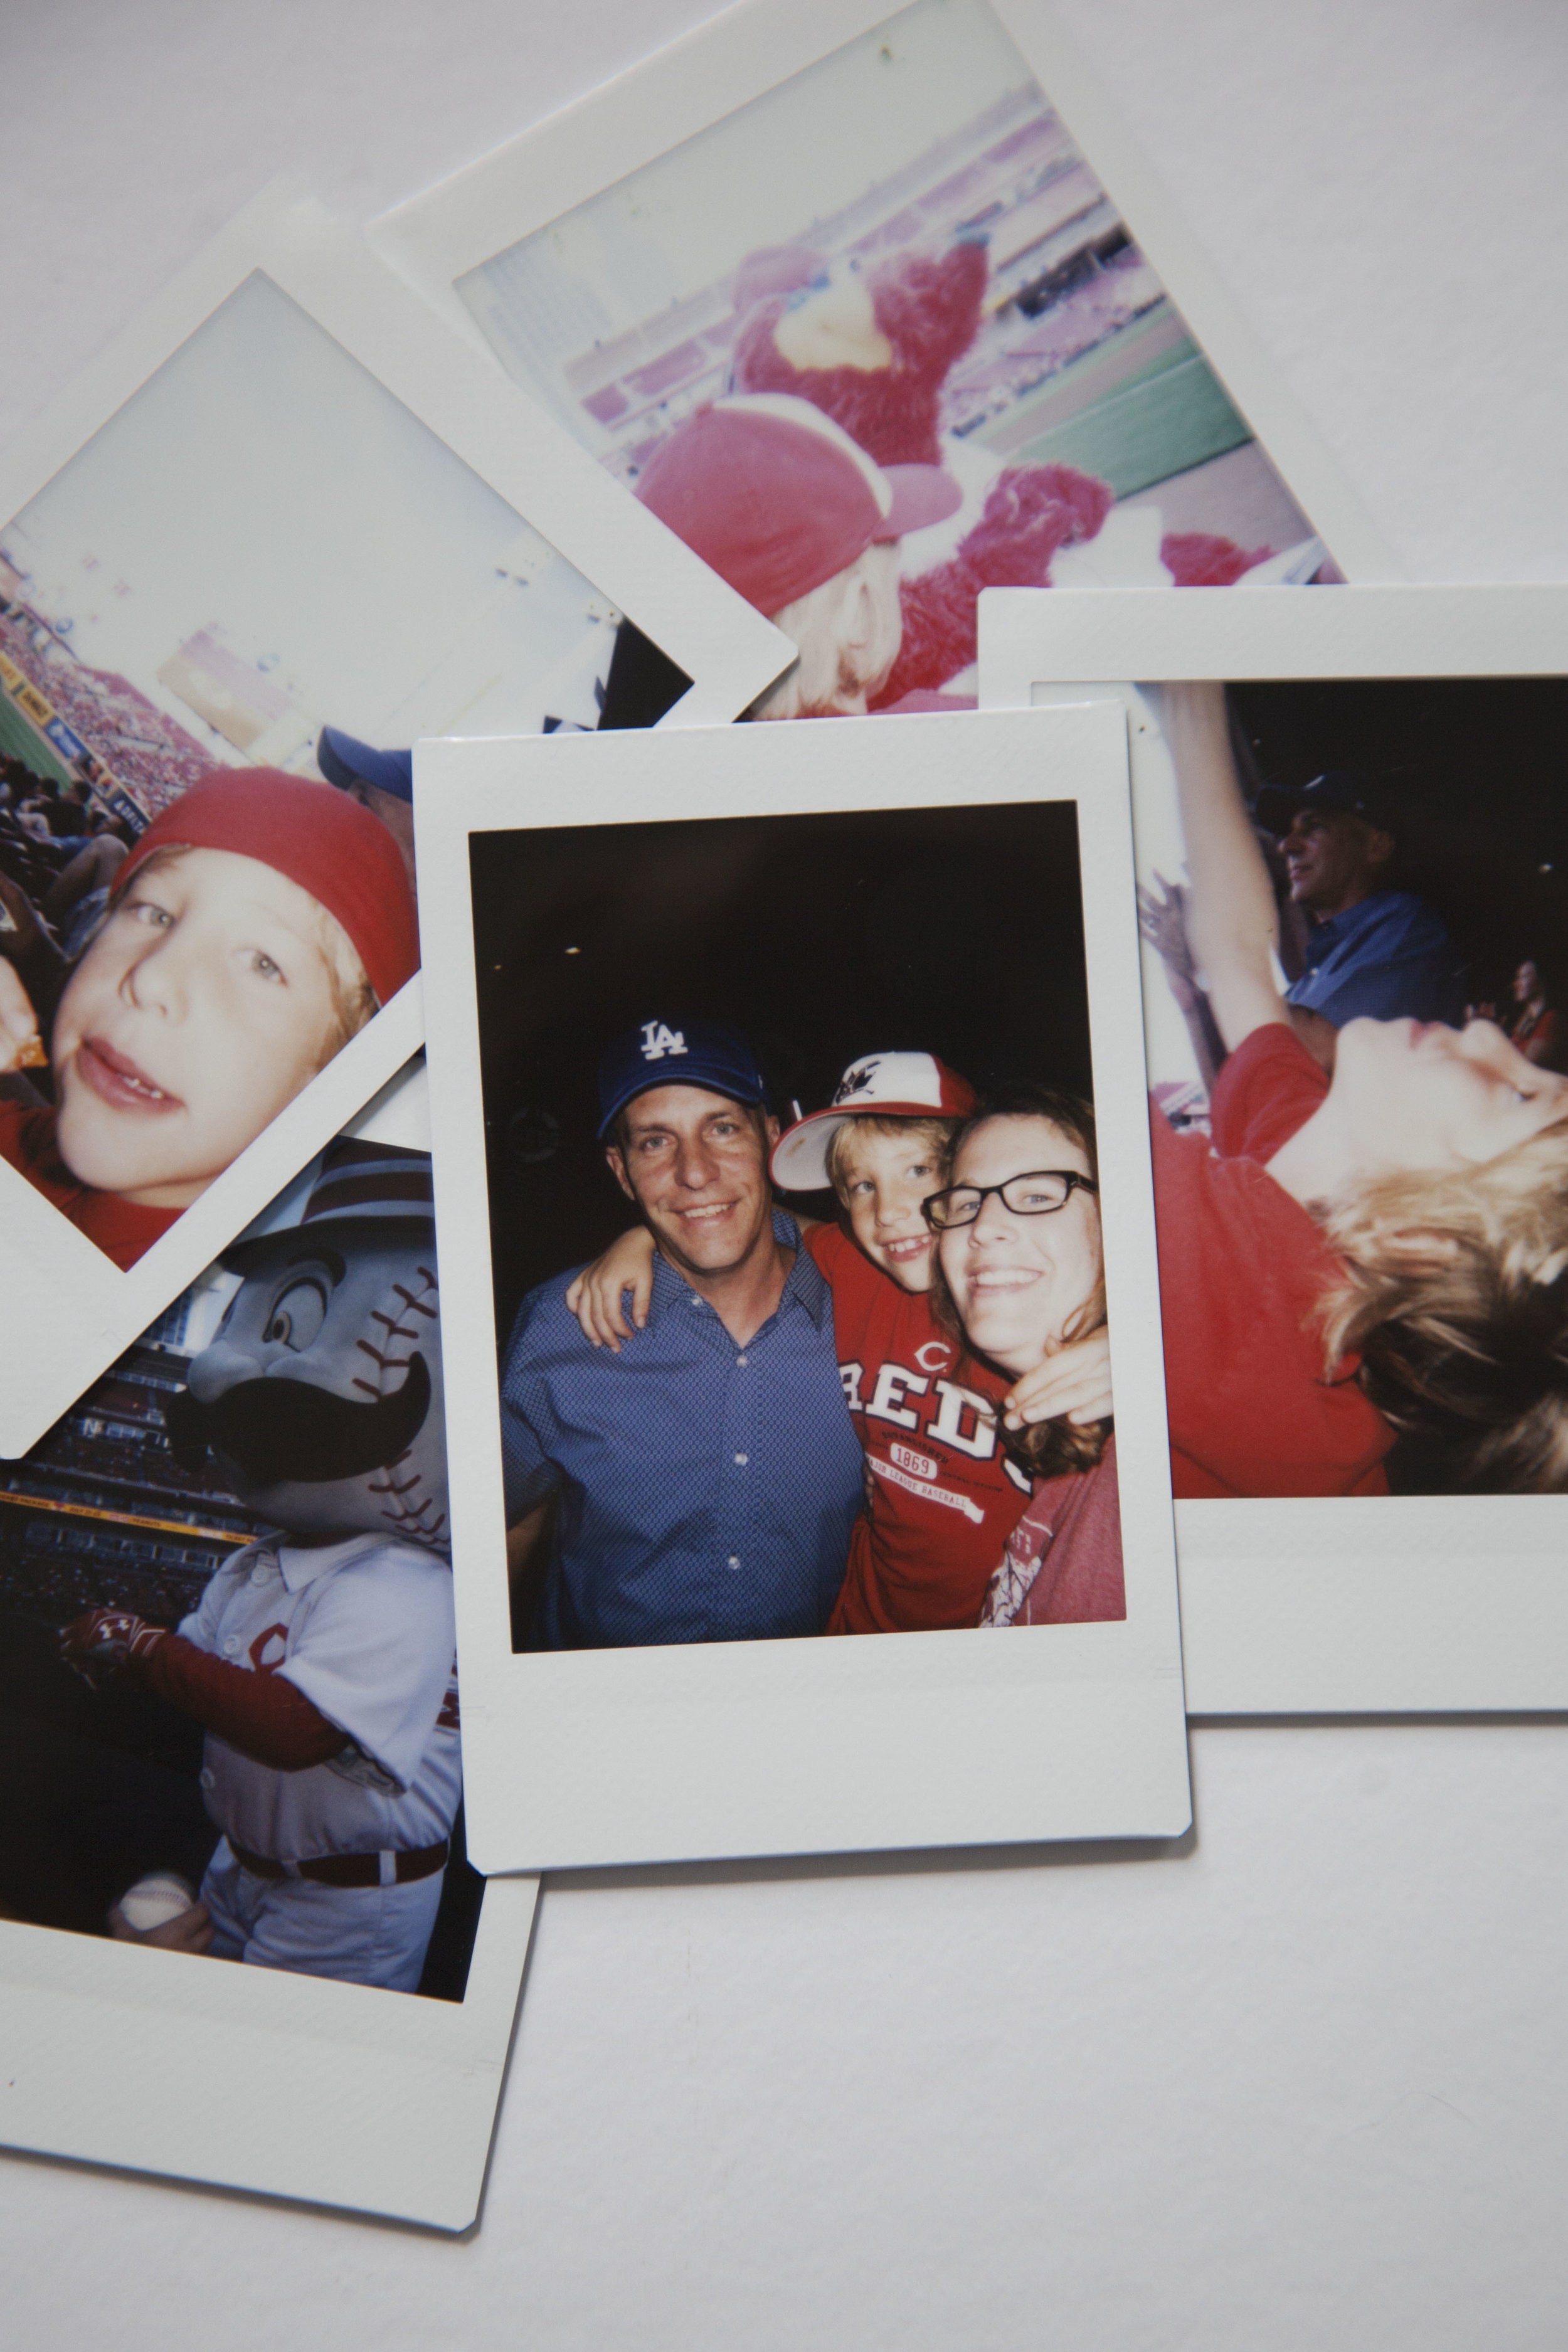 Day 31 - a perfect evening at a Reds Game in polaroids